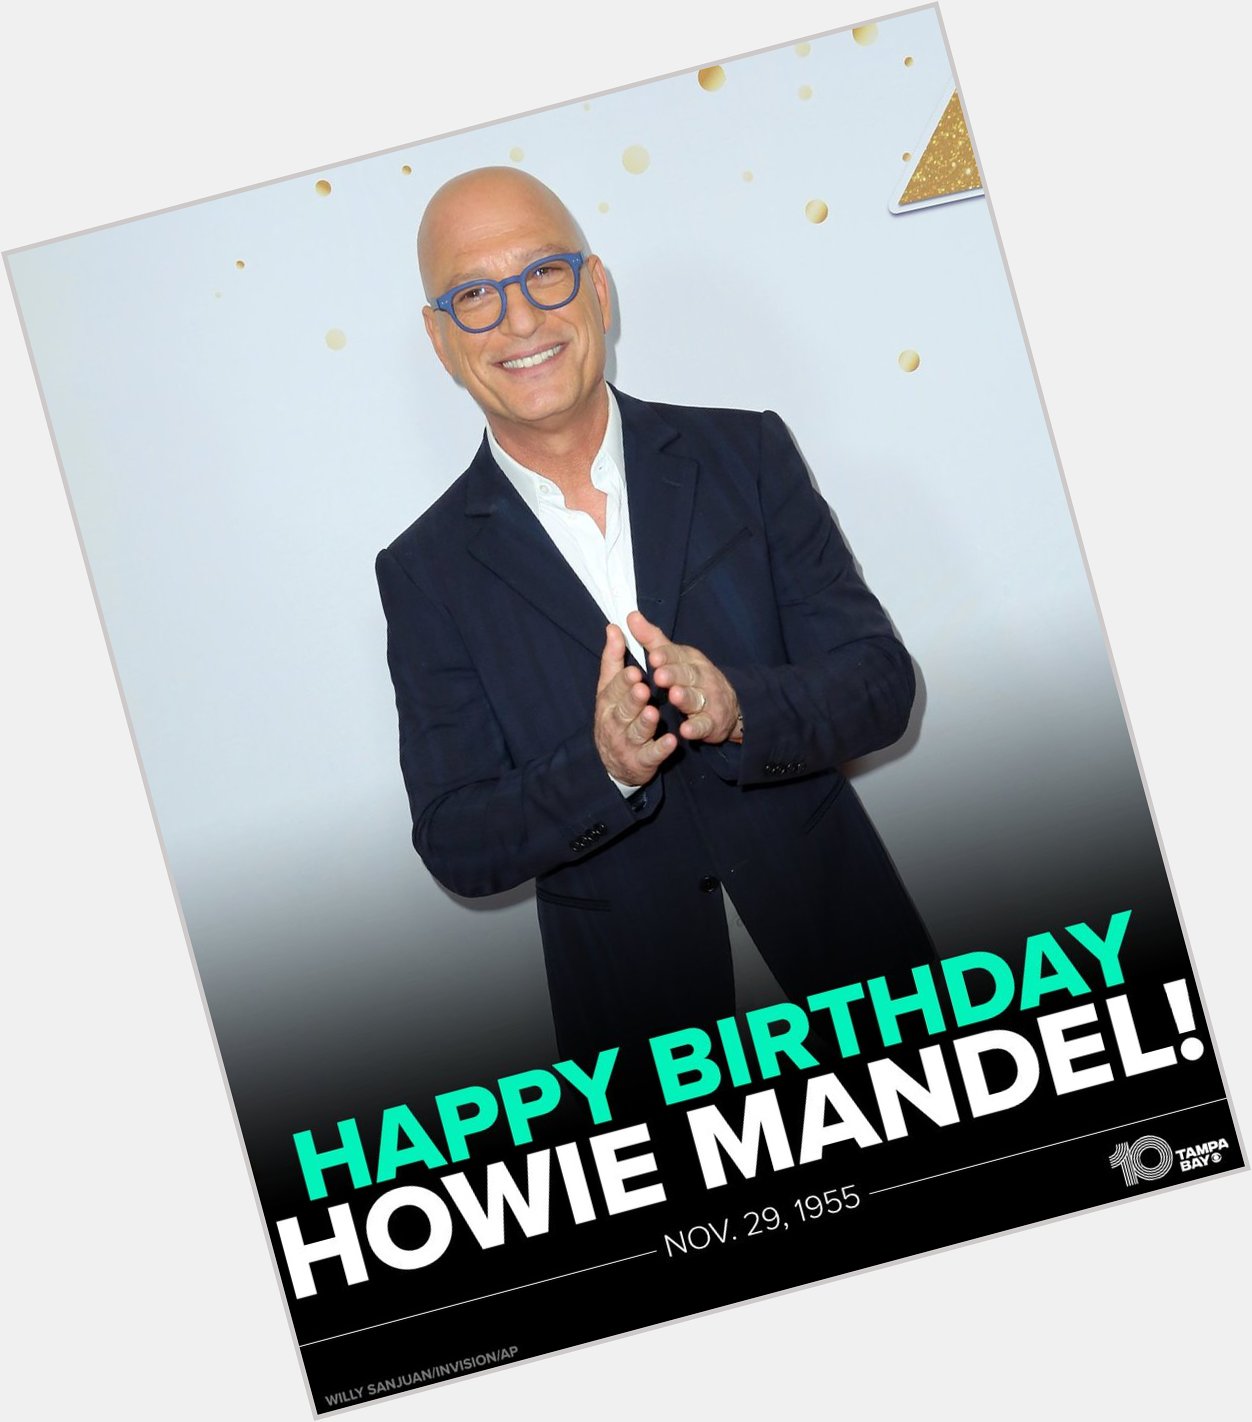 HAPPY BIRTHDAY Comedian and TV host Howie Mandel is celebrating his 66th birthday today! 